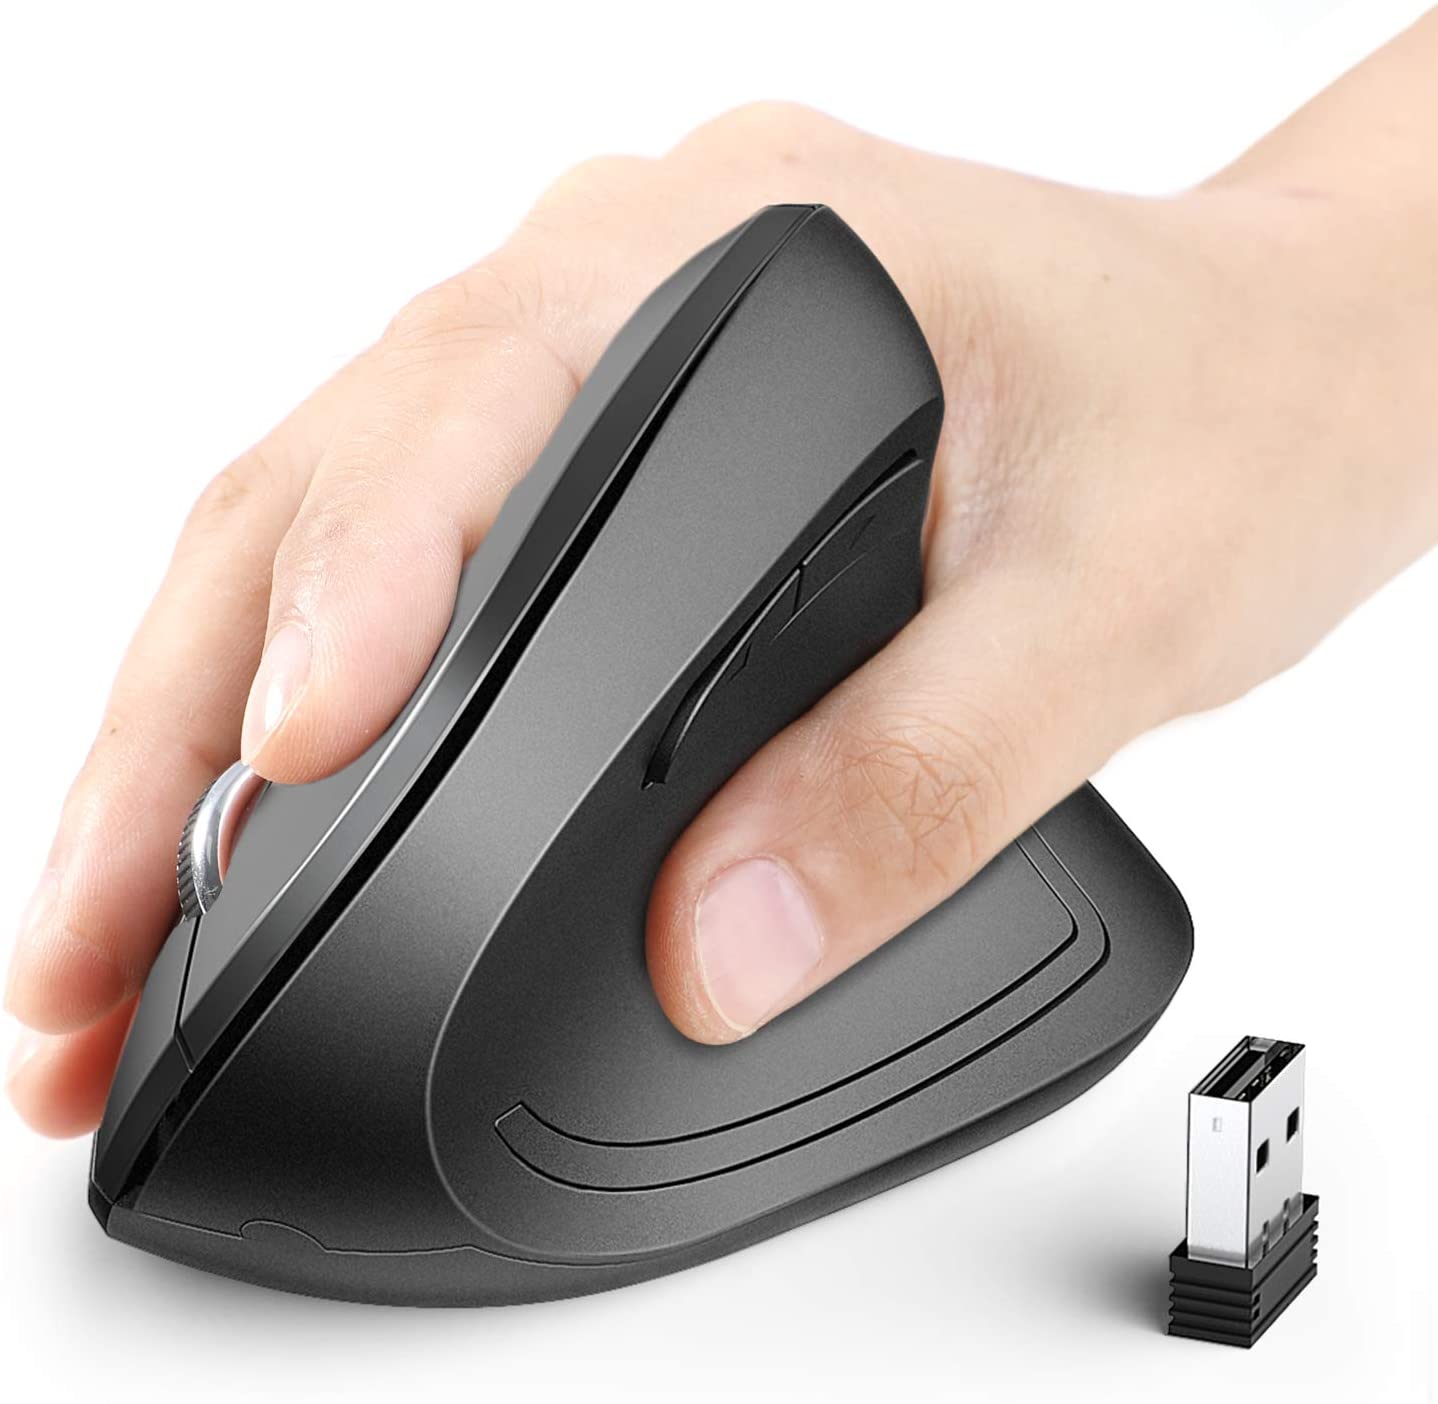 iClever WM-101 101 Ergonomic Vertical Wireless Mouse Black with 6 Buttons Adjustable DPI 49ft Bluetooth Transmission Whisper-quiet Click